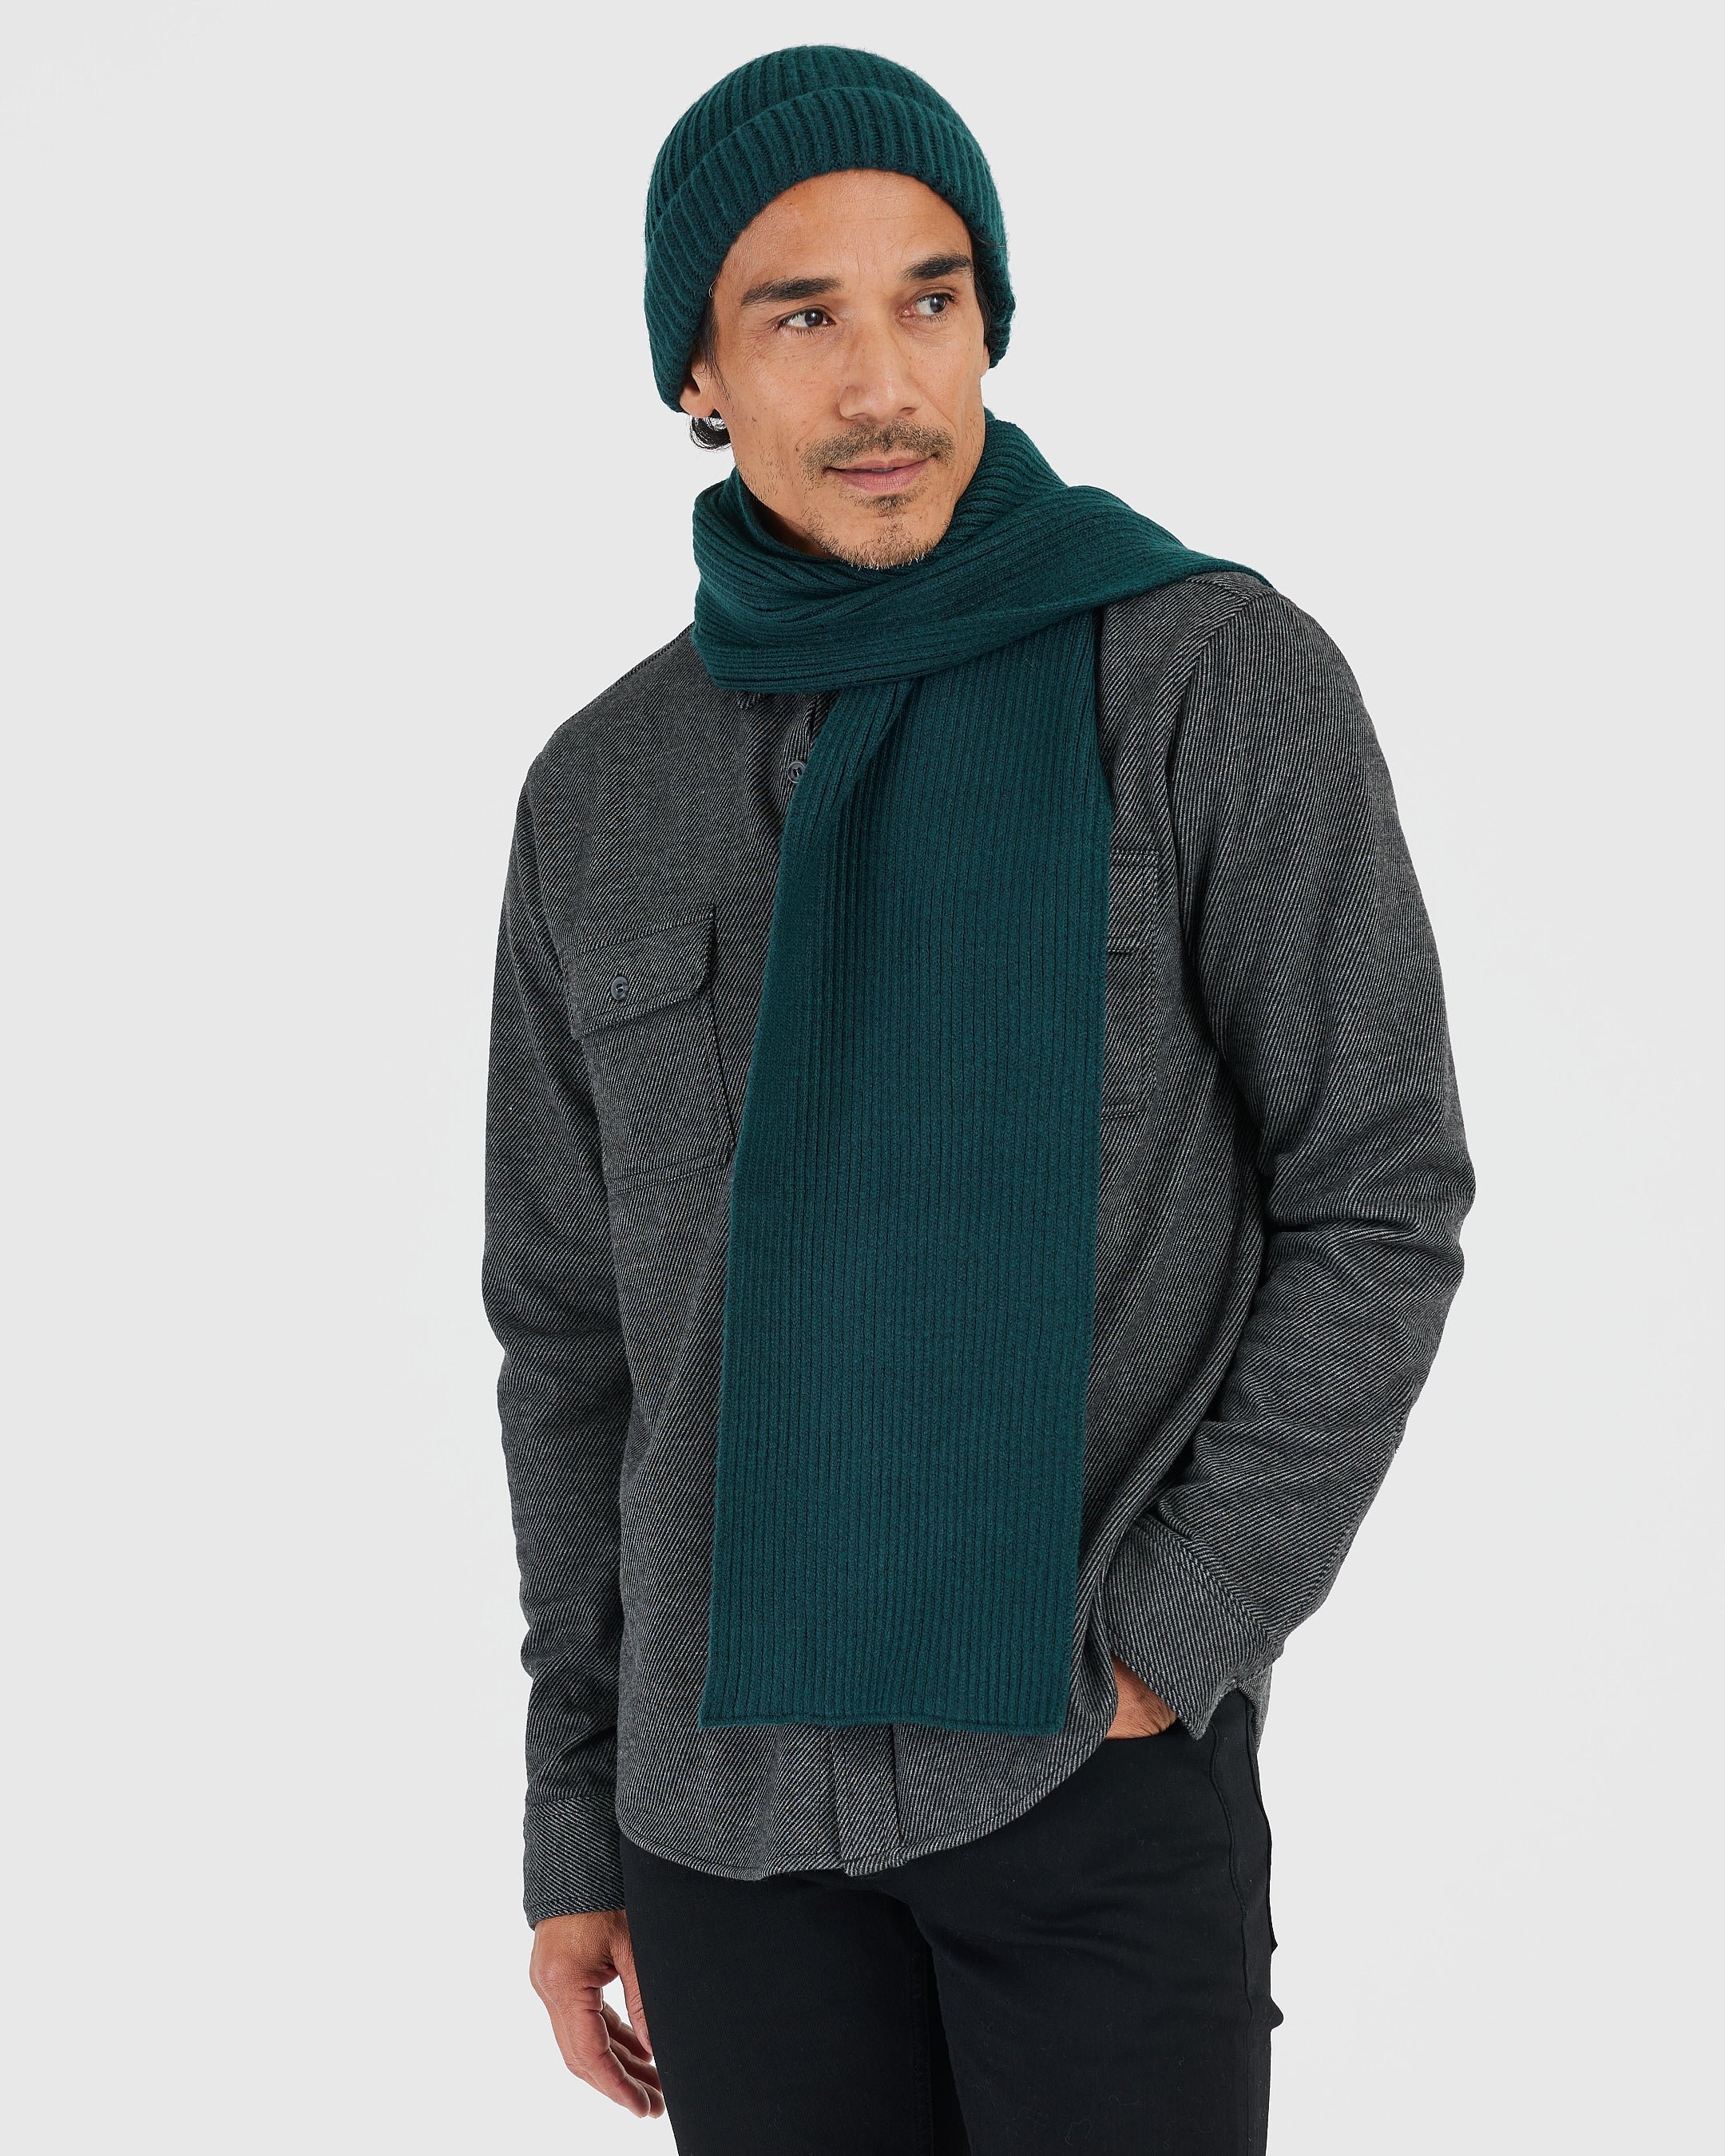 Evergreen Sweater Beanie and Scarf Set